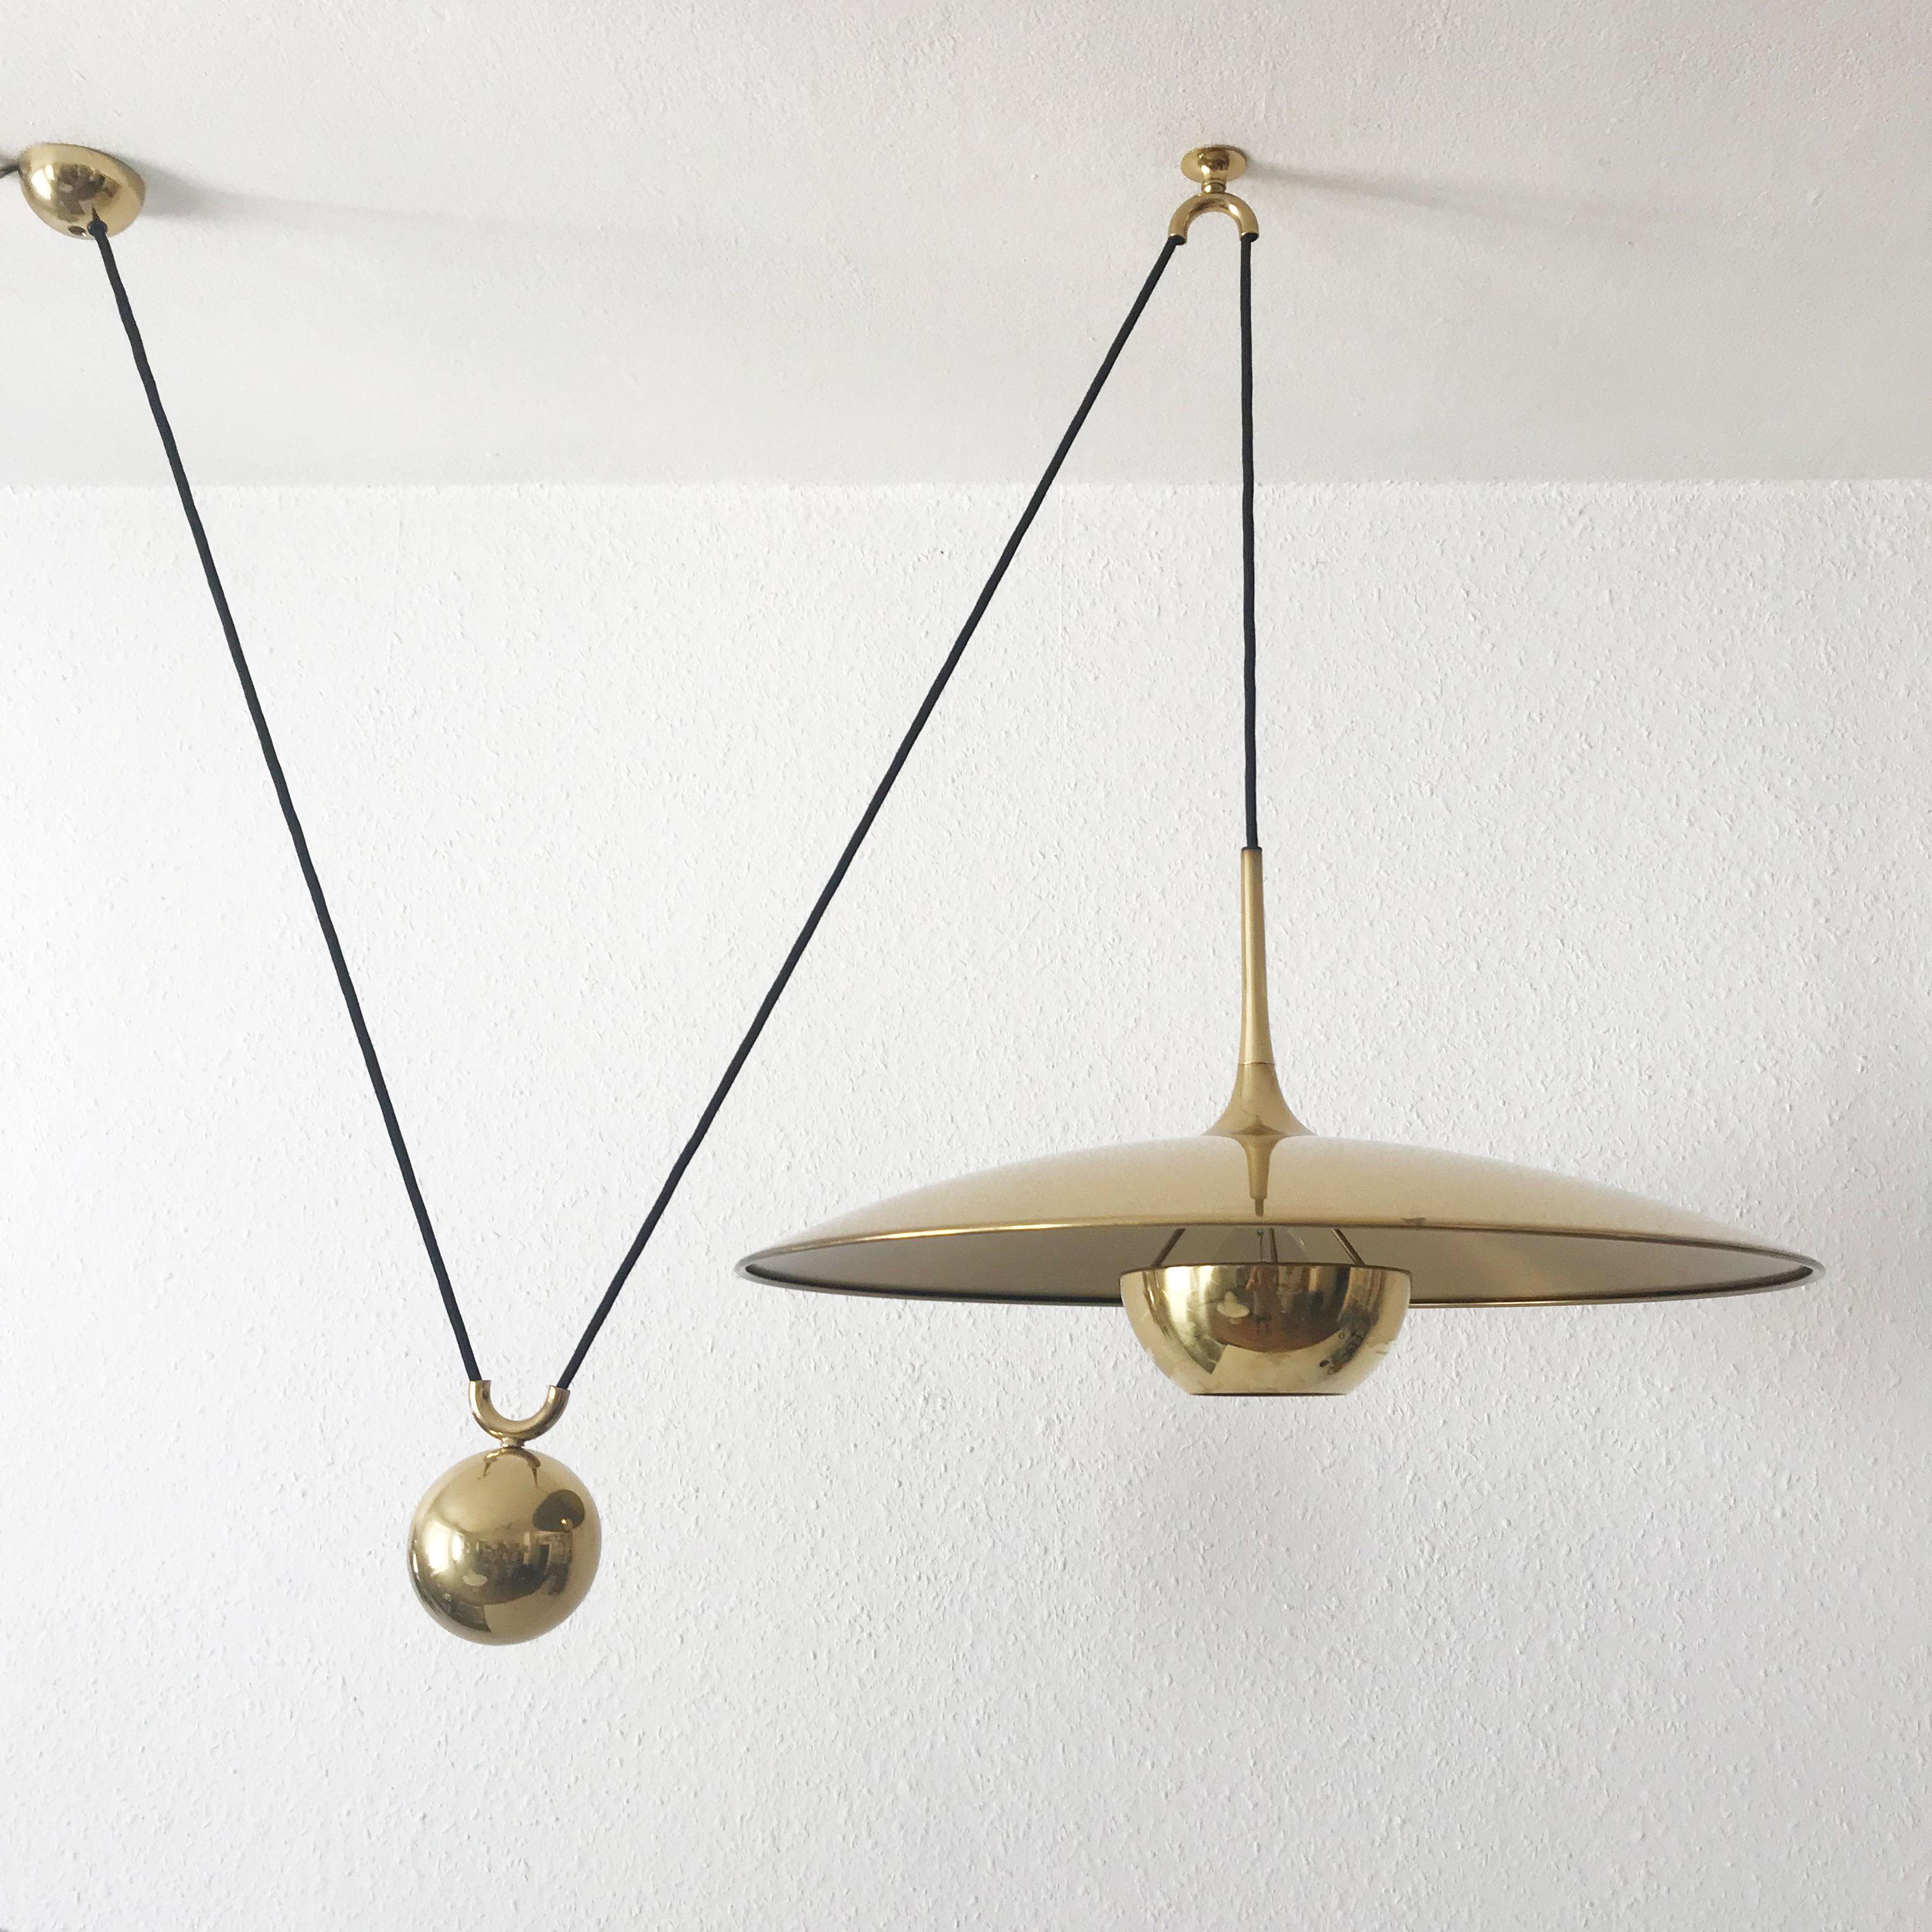 Counter Balance Pendant Lamp Onos 55 by Florian Schulz, 1980s, Germany 5